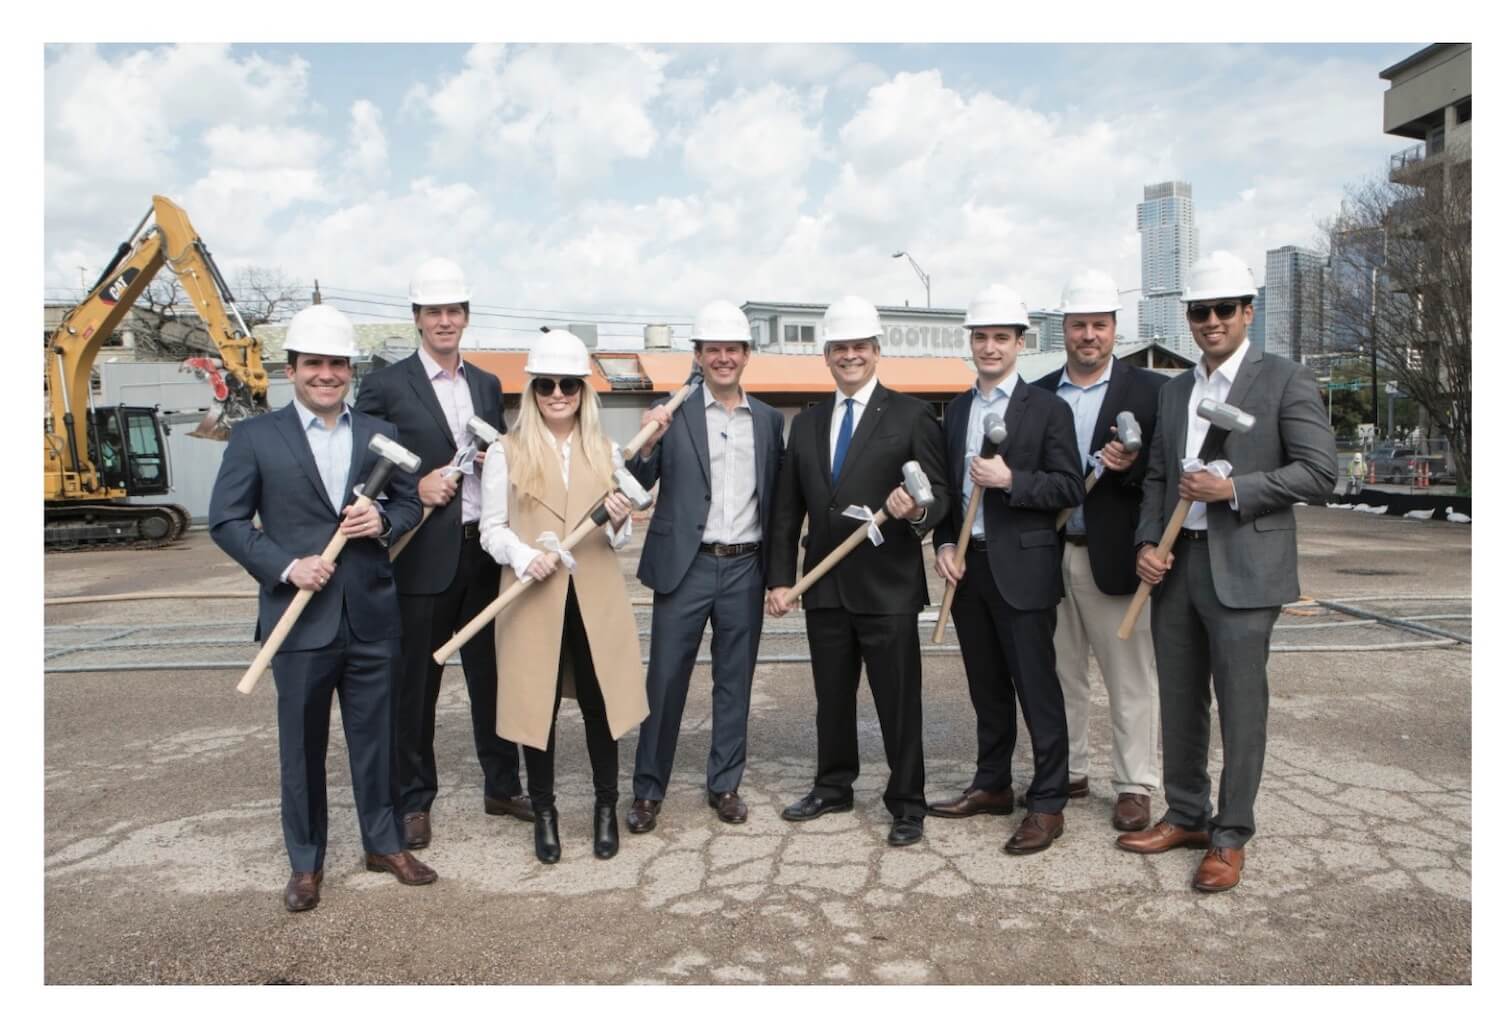 River South Groundbreaking team